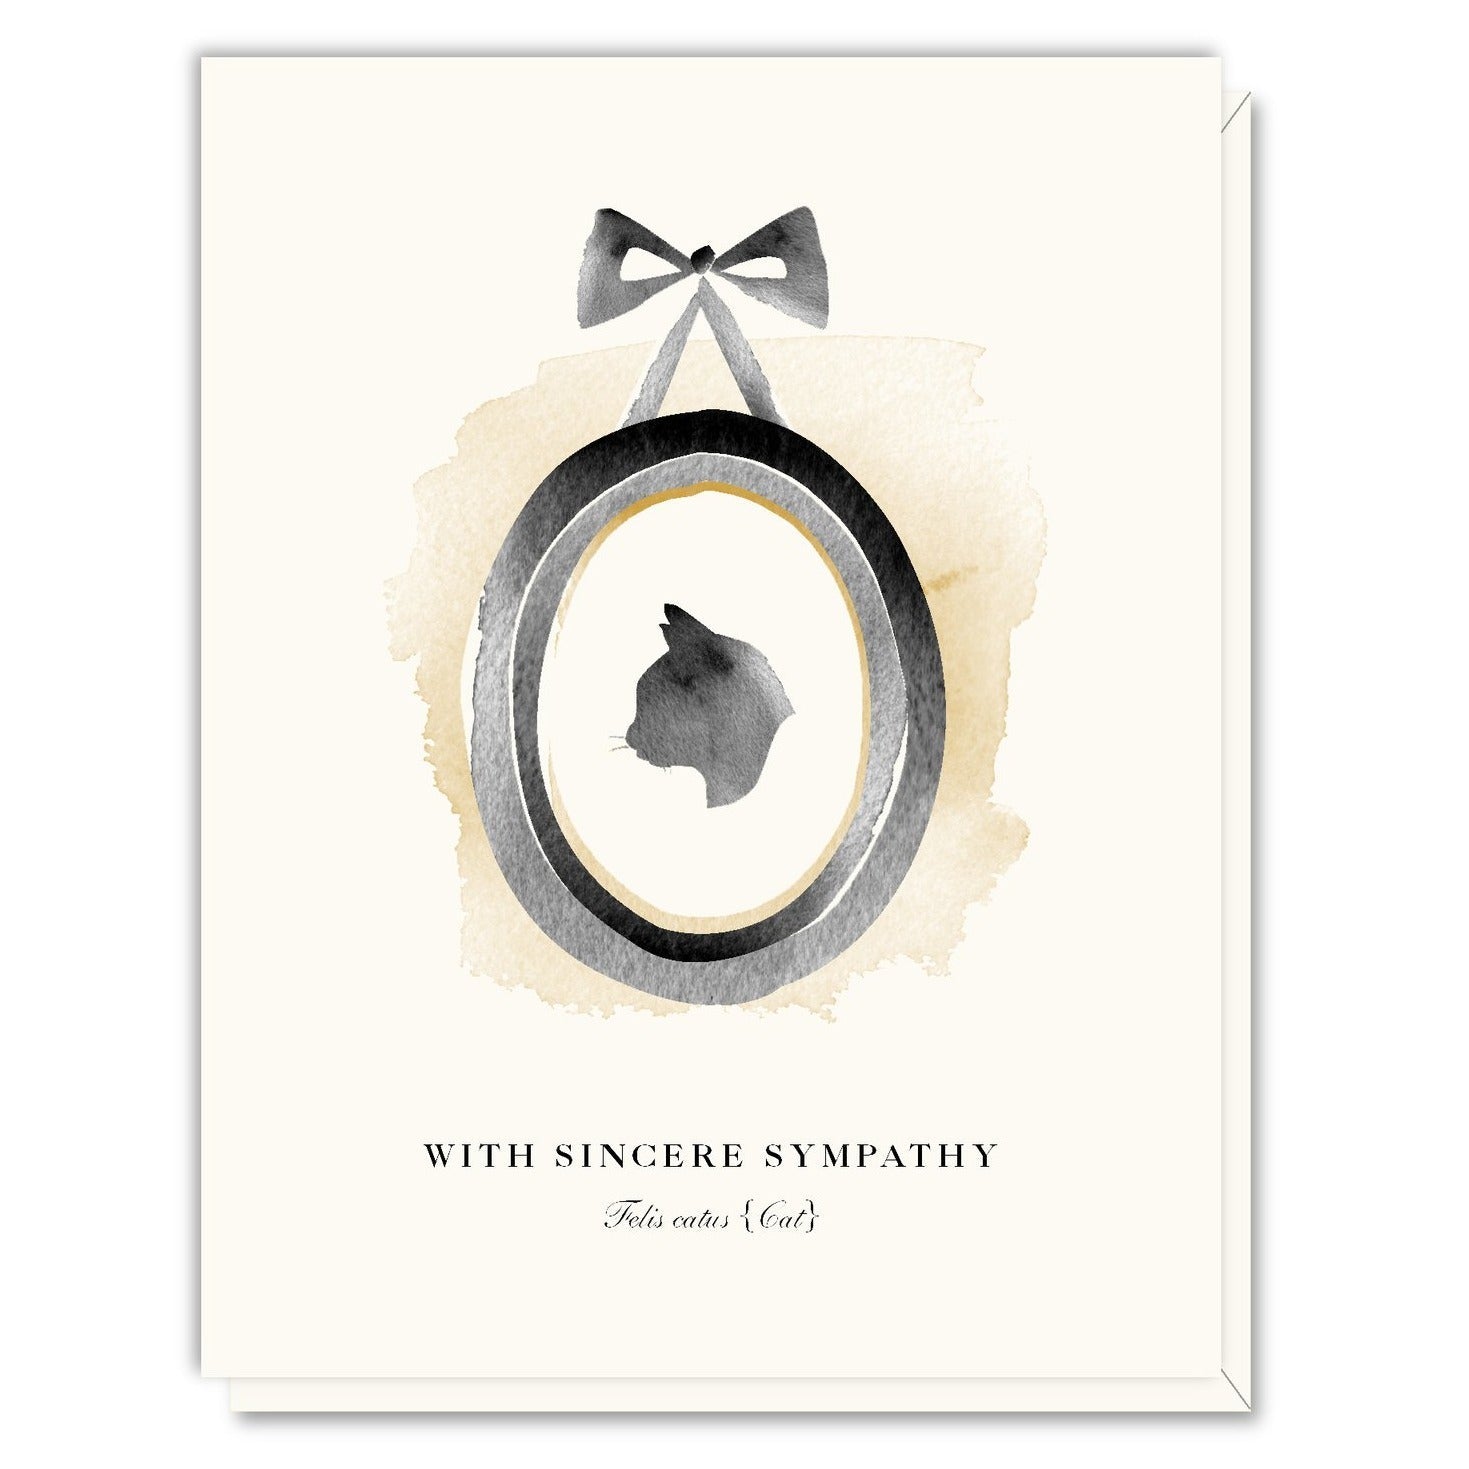 side silhouette of cat in victorian style framing, cover message says- with sincere sympathy